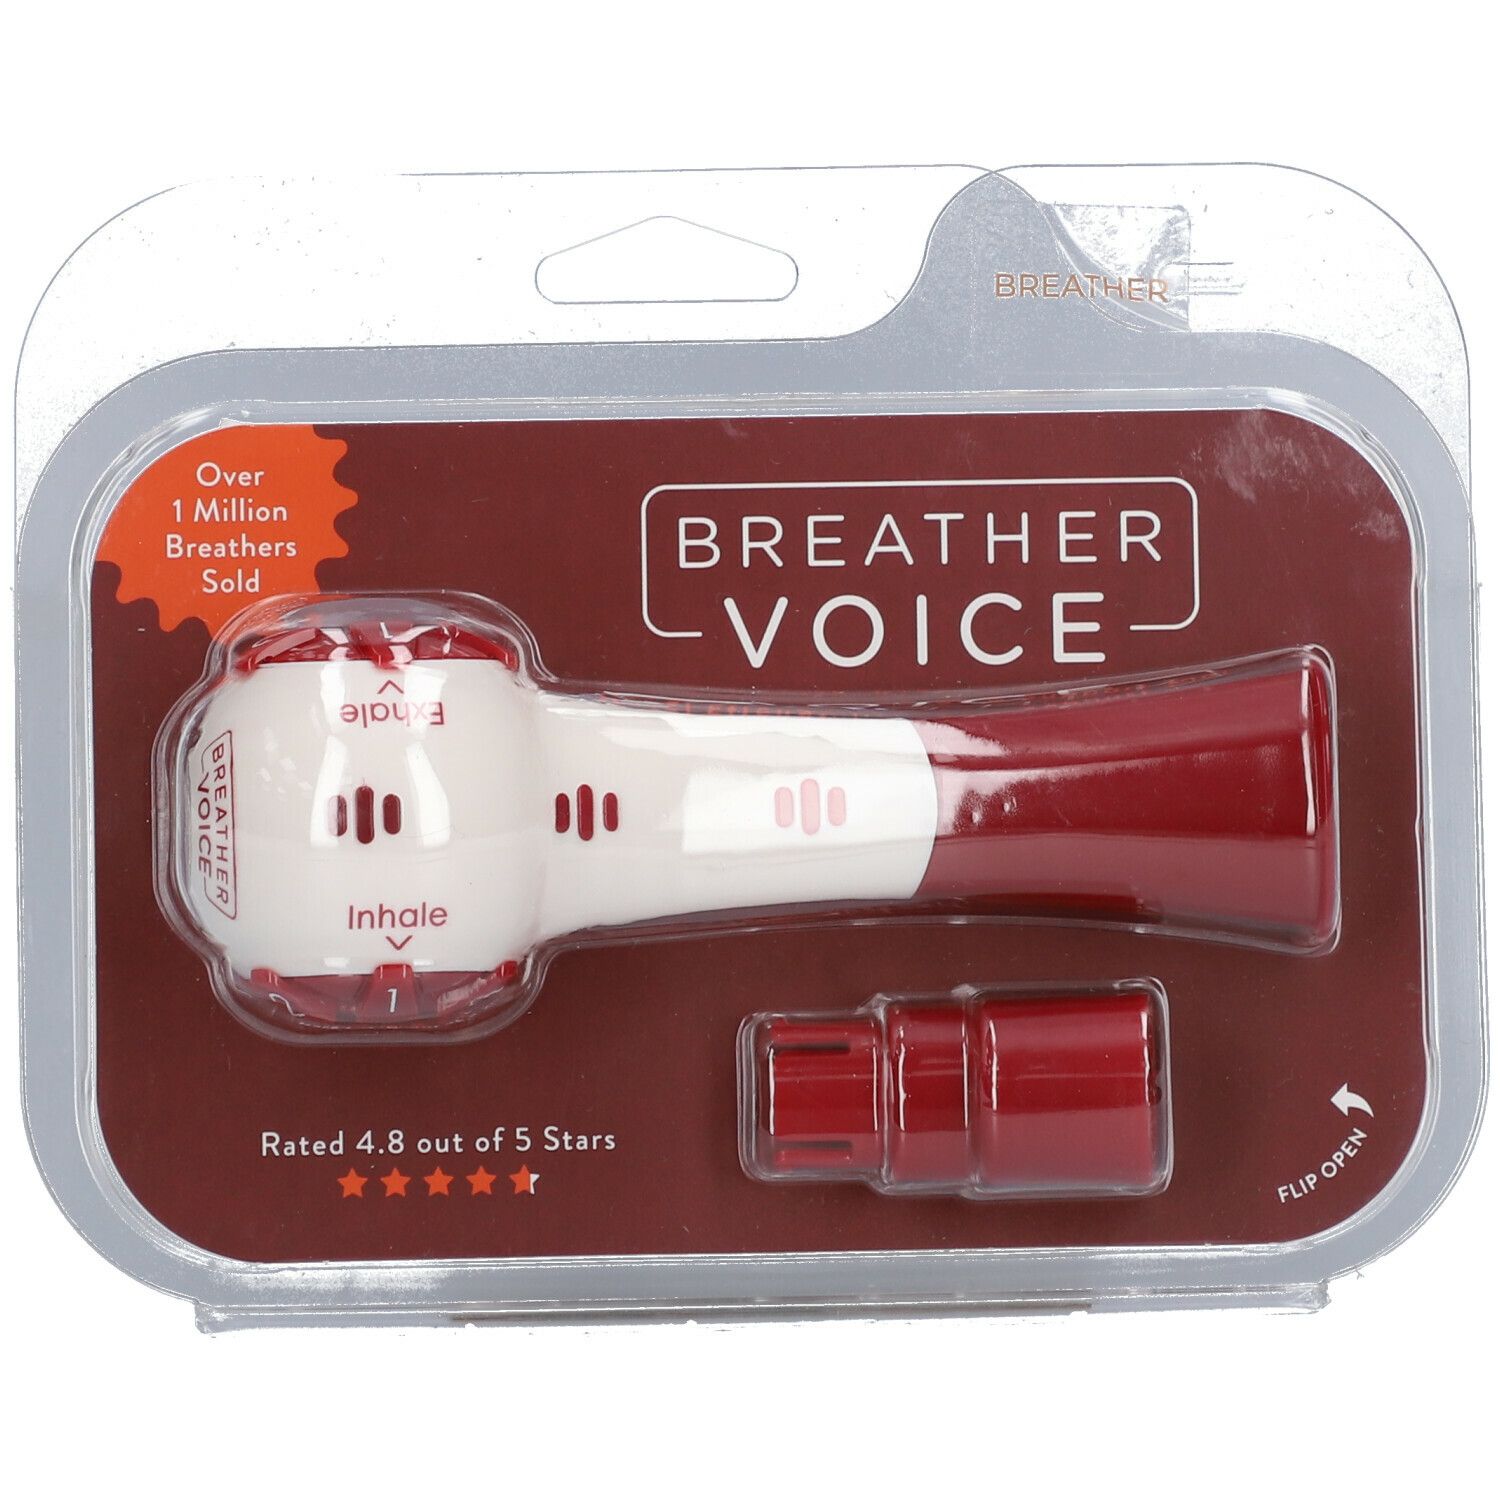 THE BREATHER® VOICE